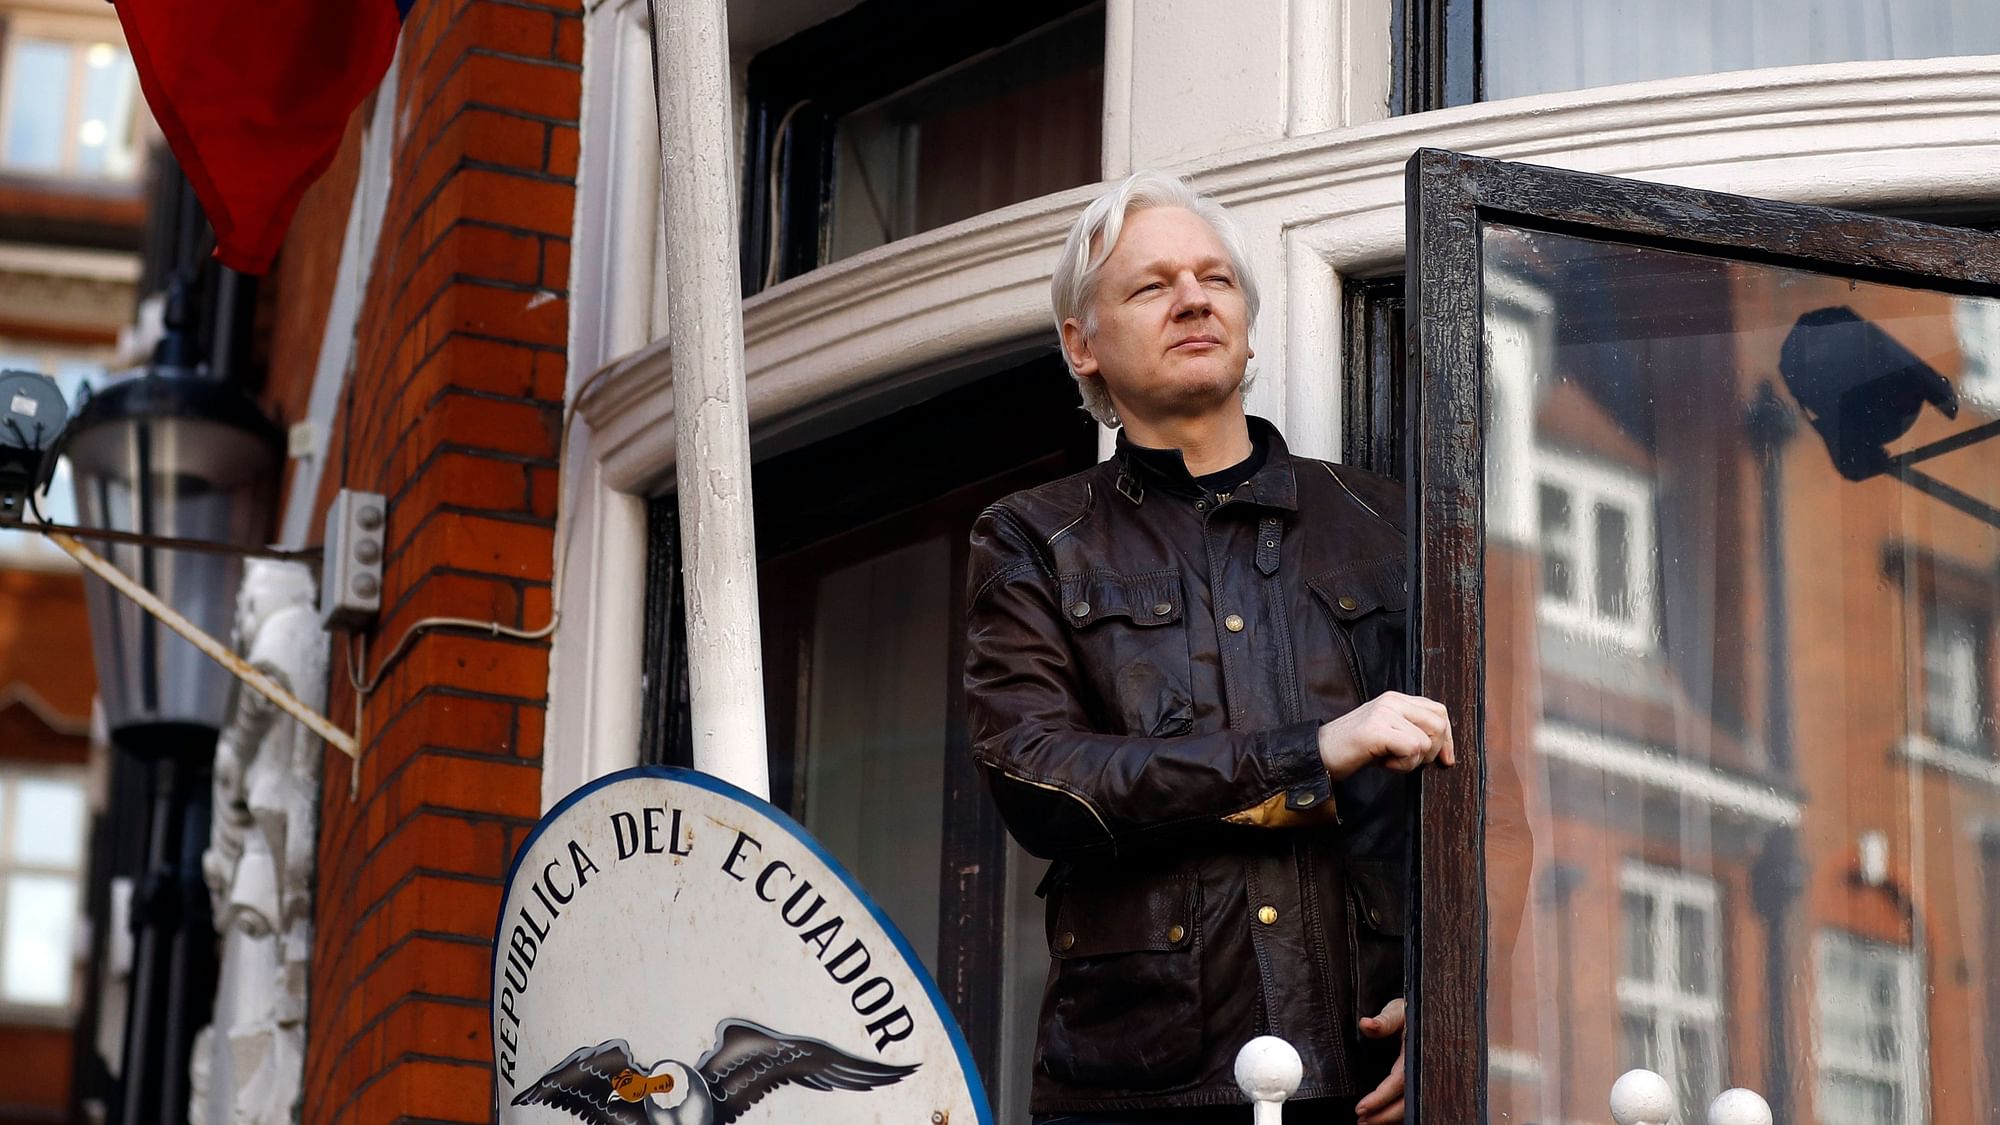 File photo of WikiLeaks founder Julian Assange greeting supporters outside the Ecuadorian embassy in London.